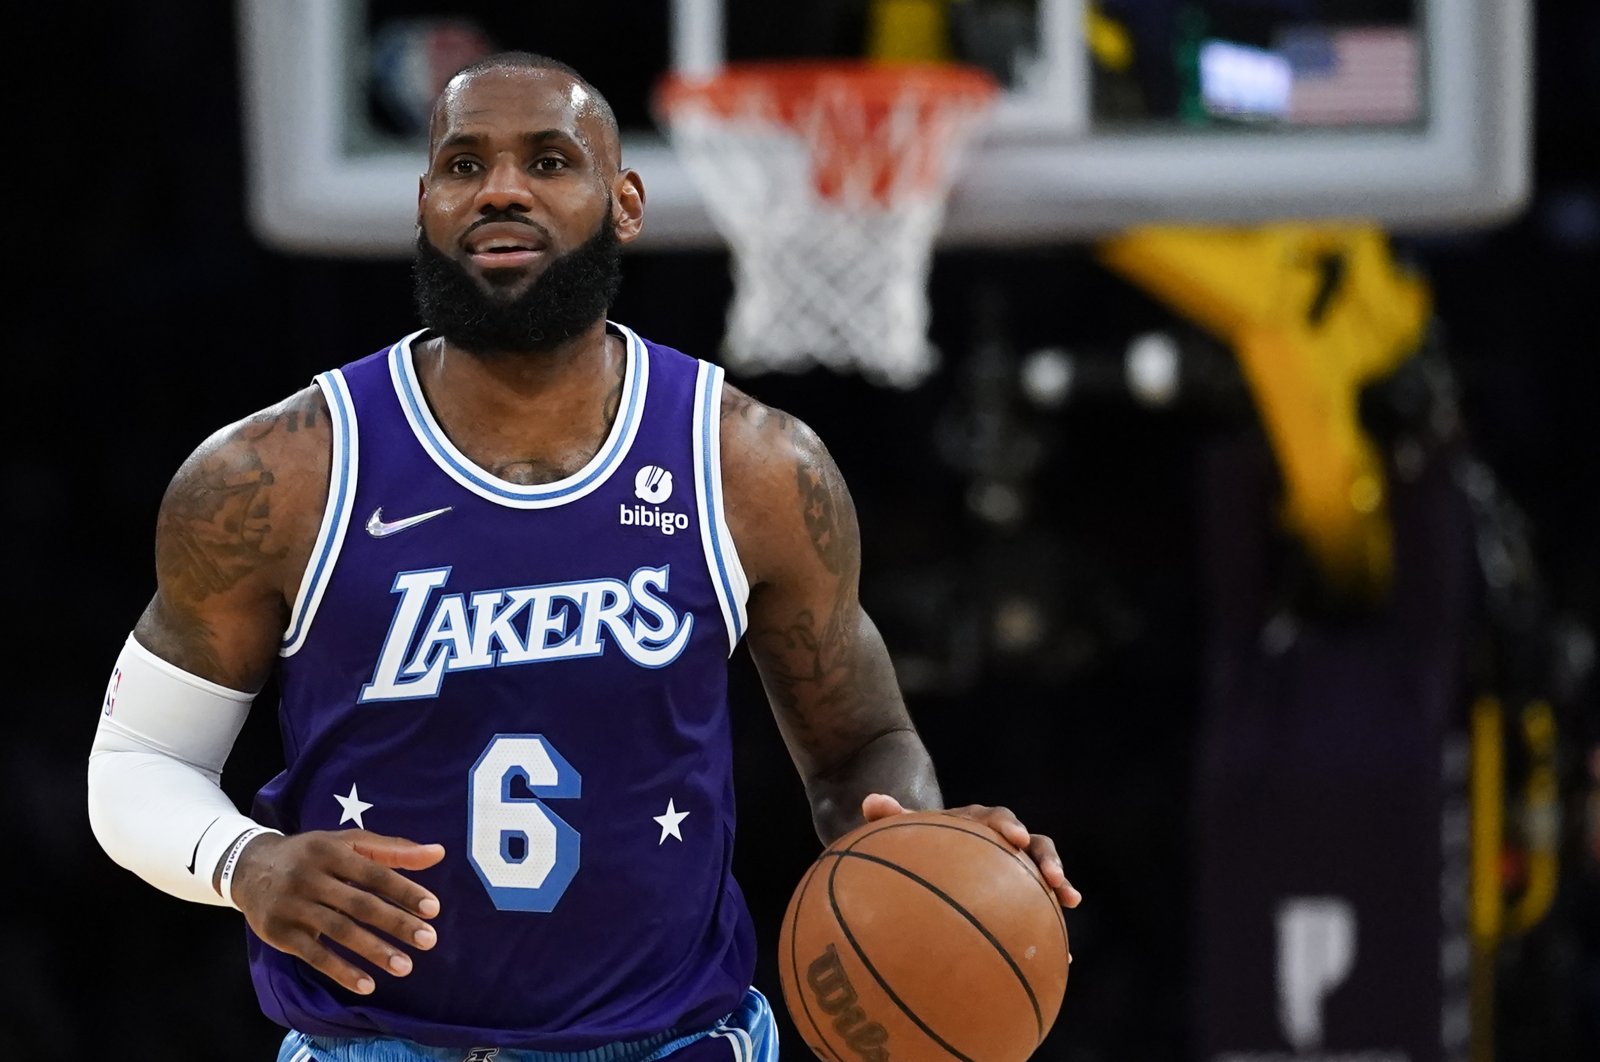 Lakers&#039; forward LeBron James in action during an NBA game against the Pelicans, Los Angeles, U.S., April 1, 2022. (AP Photo)